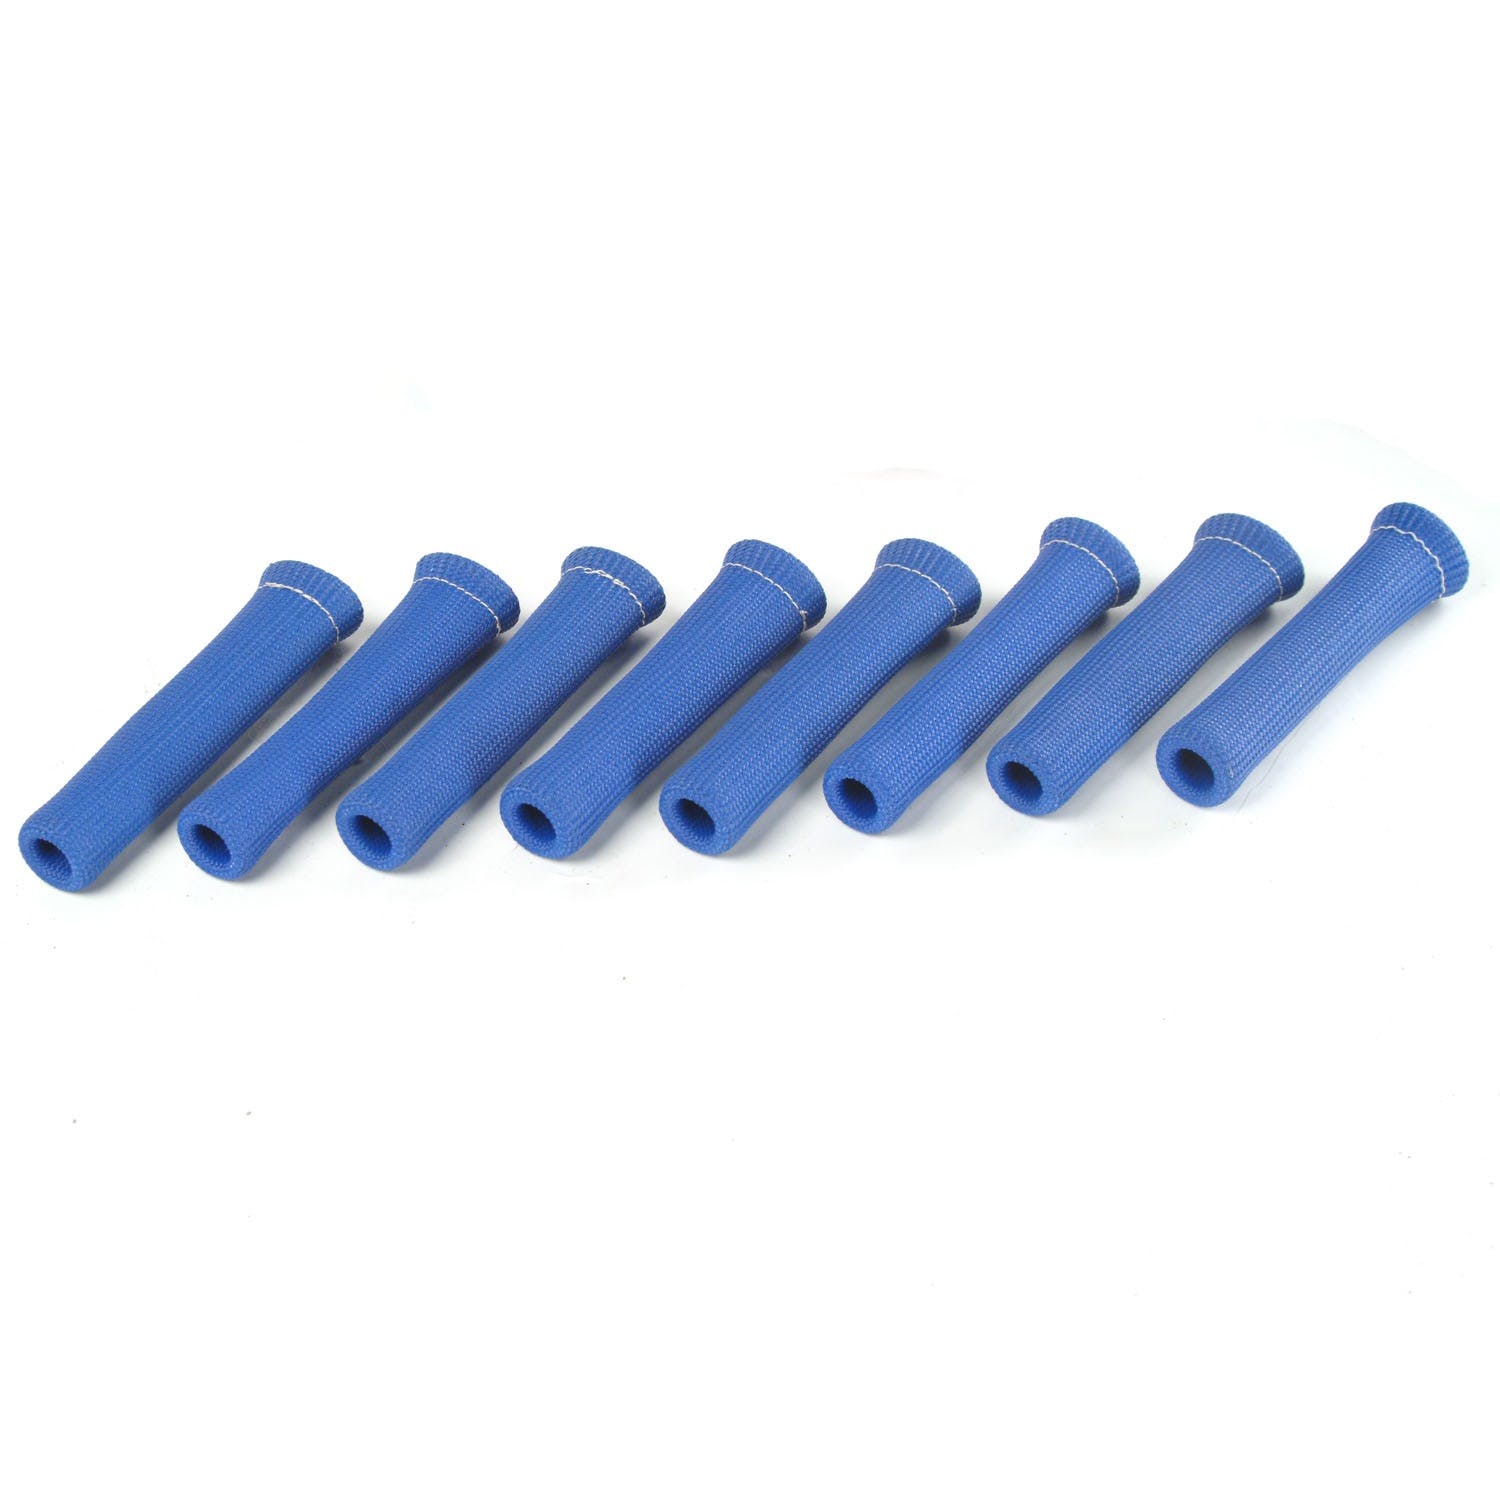 Design Engineering, Inc. 10532 Protect-A-Boot 6 Blue (8-pack)